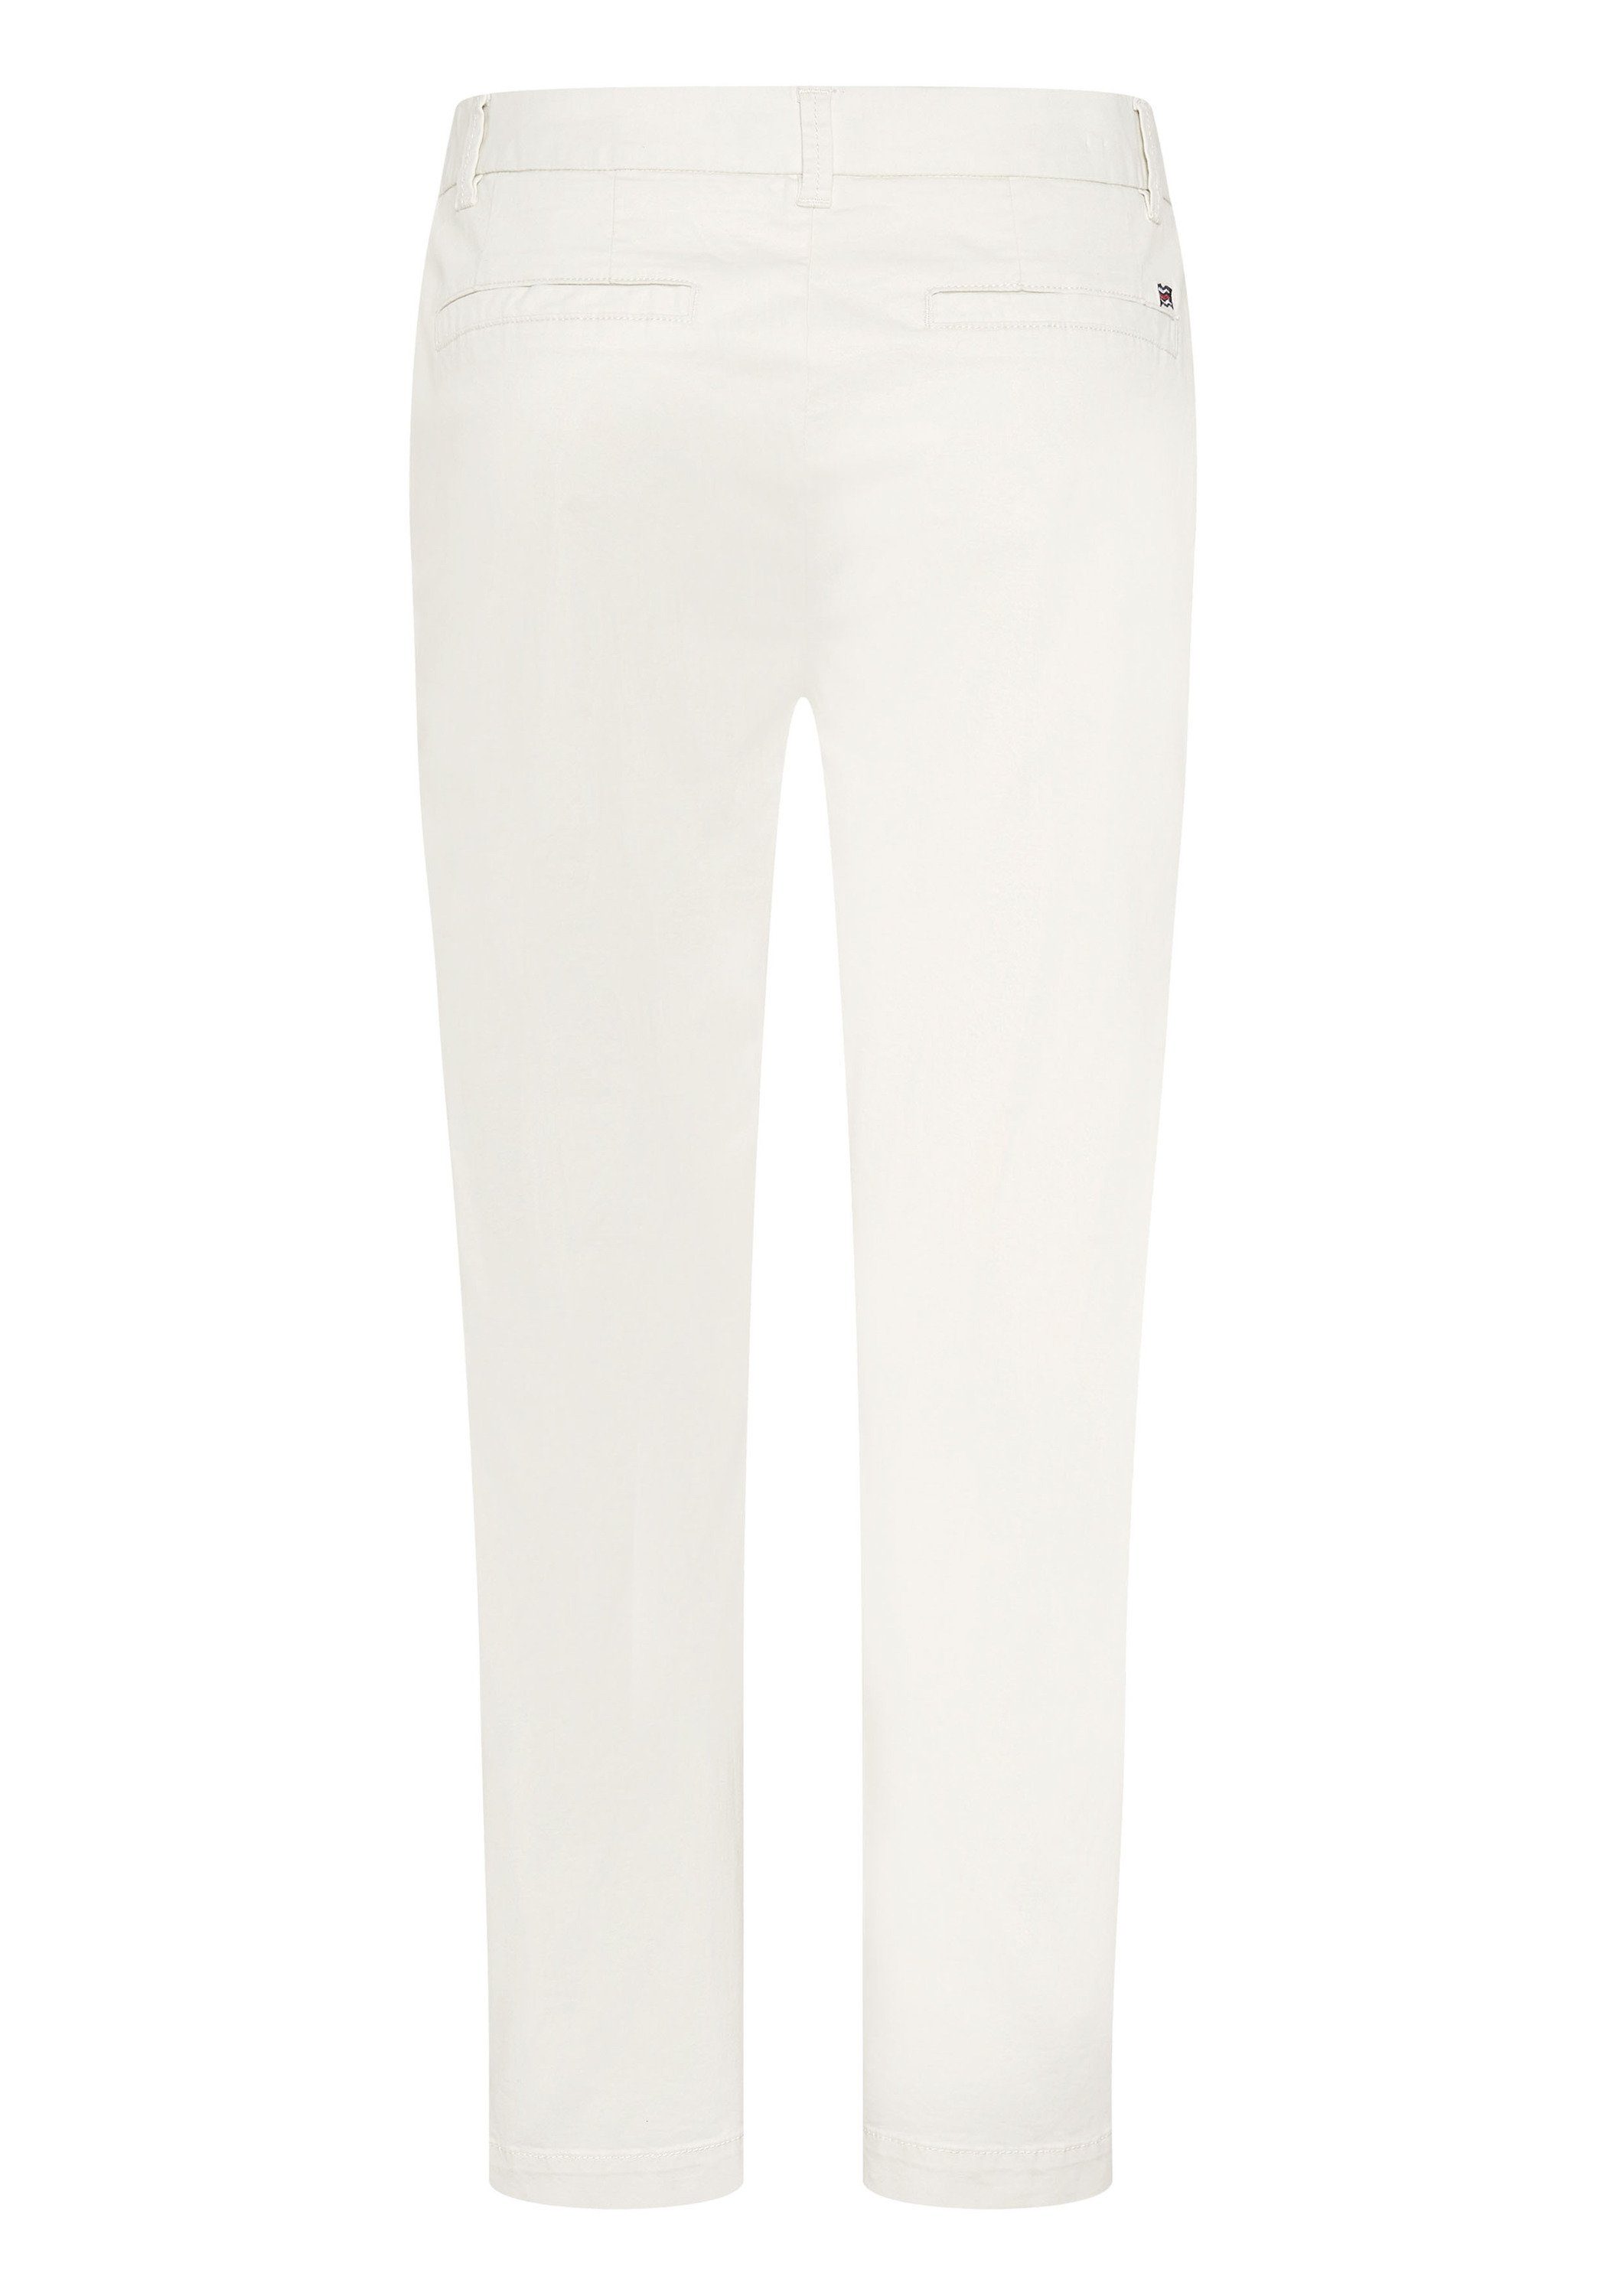 Polo Sylt Chinohose im cleanen 11-0701 Whisper White Look